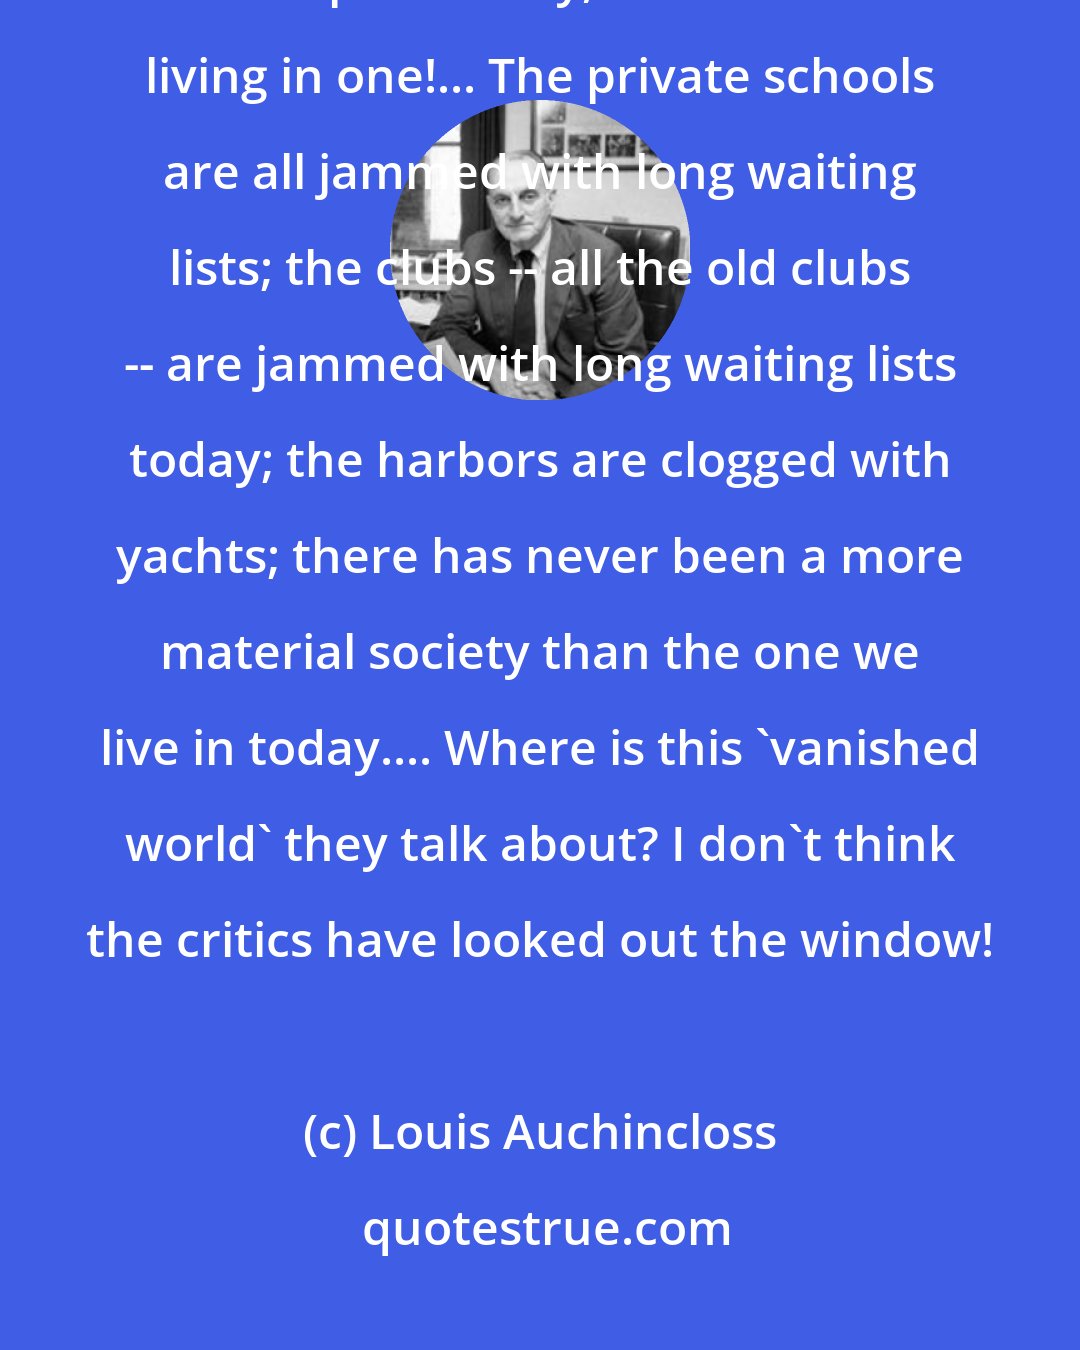 Louis Auchincloss: I grew up in the 1920s and 1930s in a nouveau riche world, where money was spent wildly, and I'm still living in one!... The private schools are all jammed with long waiting lists; the clubs -- all the old clubs -- are jammed with long waiting lists today; the harbors are clogged with yachts; there has never been a more material society than the one we live in today.... Where is this 'vanished world' they talk about? I don't think the critics have looked out the window!